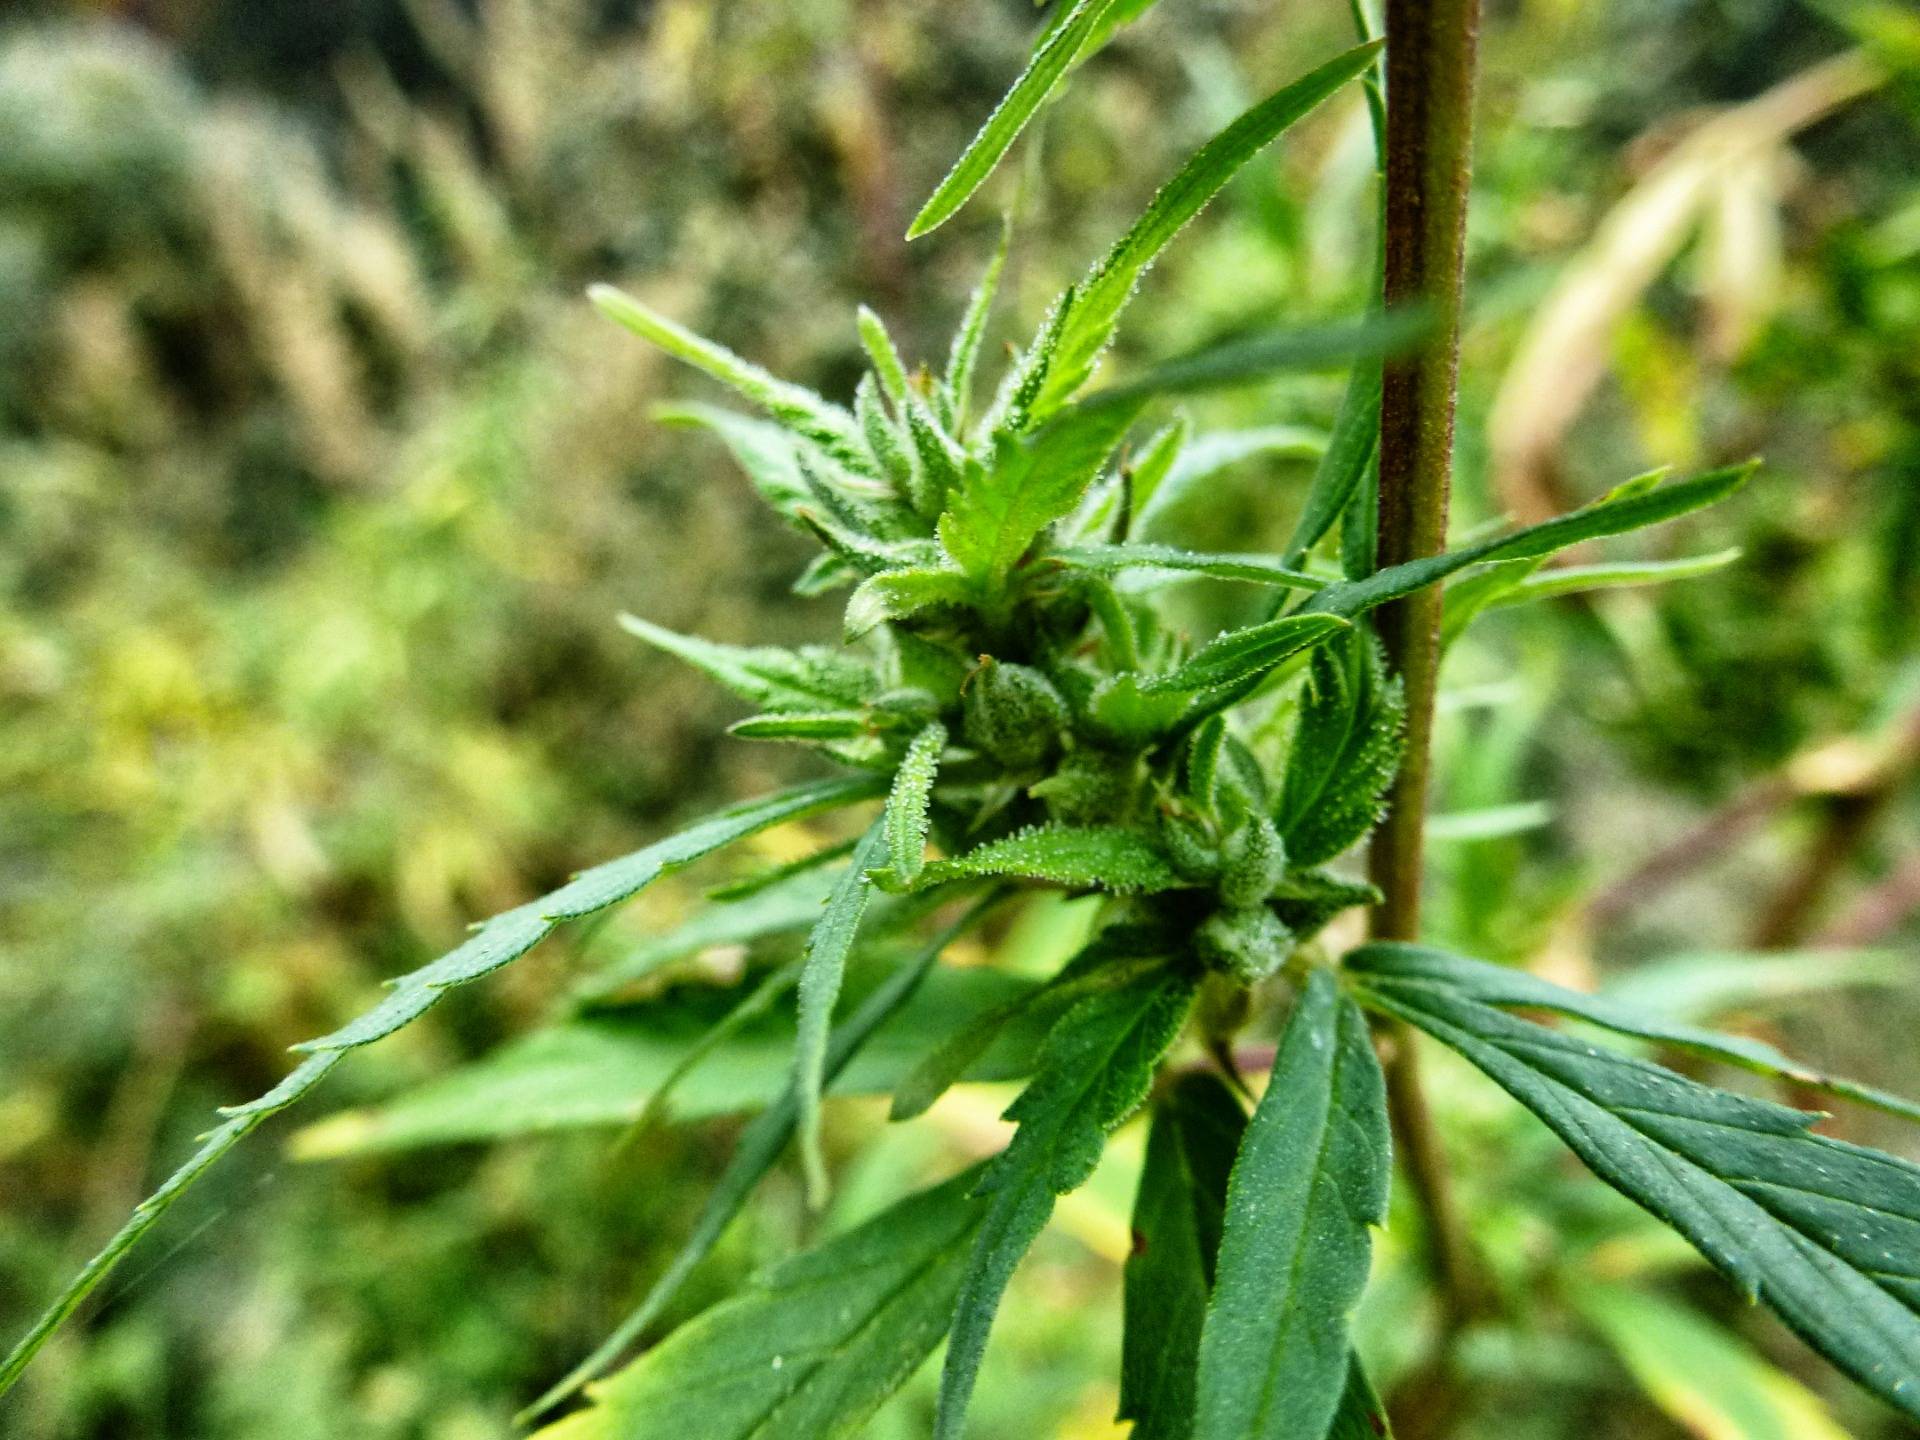 Albania: Walking through the fields of weed